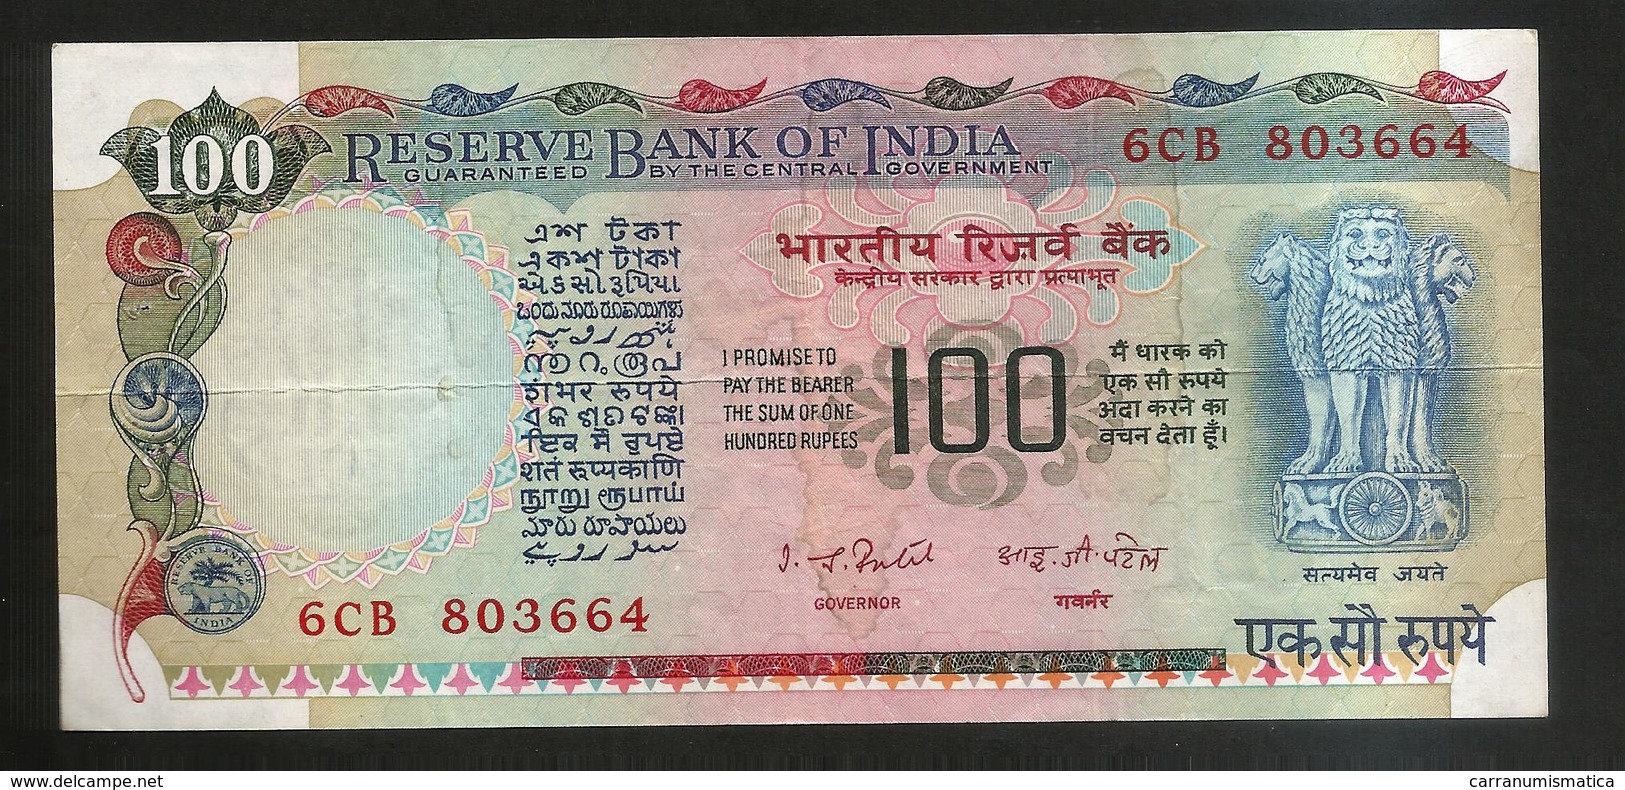 INDIA - RESERVE BANK Of INDIA - 100 RUPEES - India